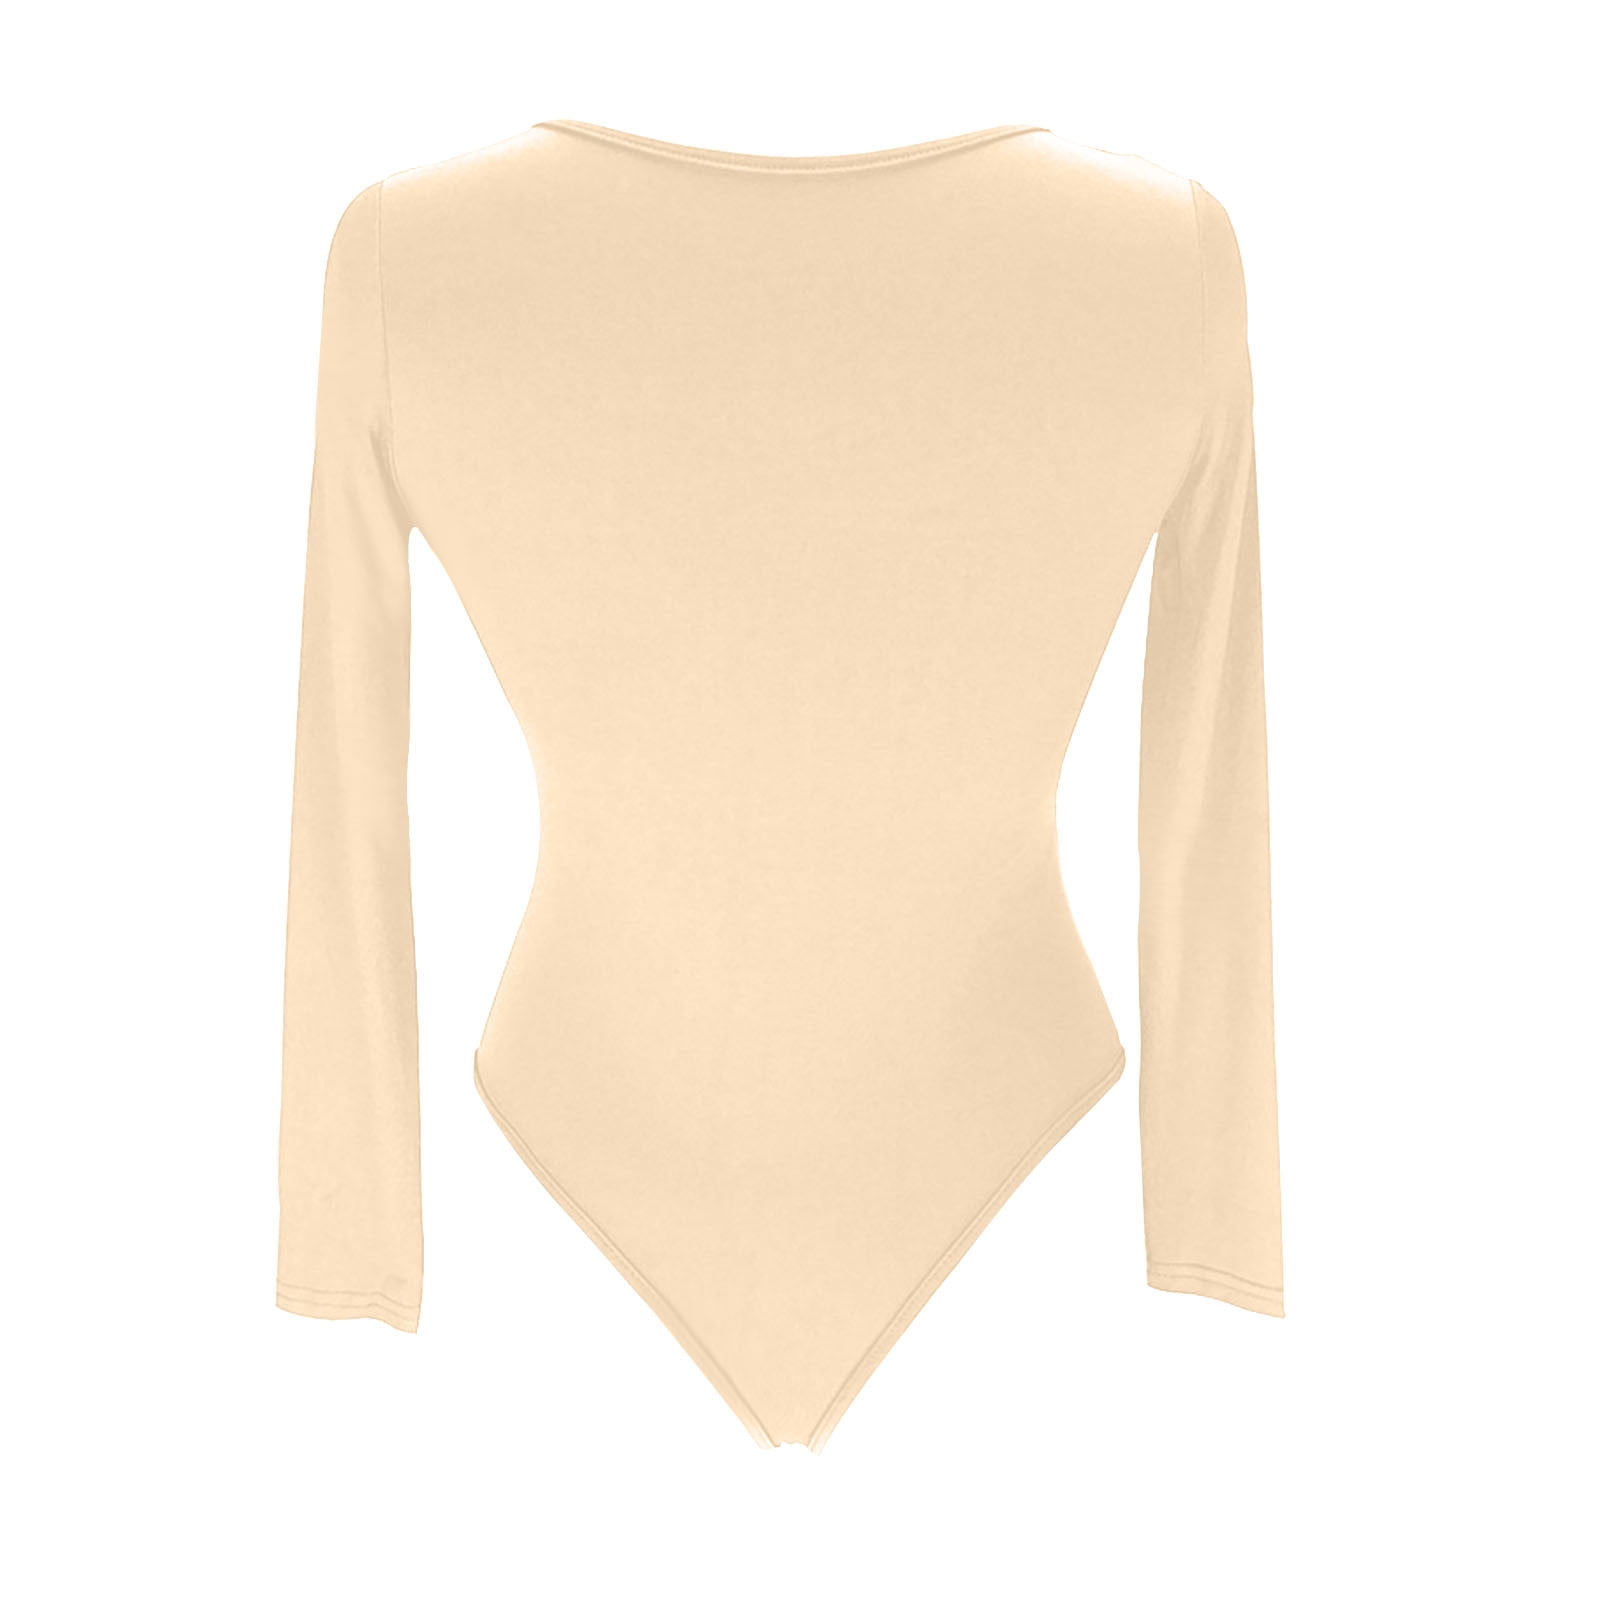 Honeeladyy Women's Round Neck Zipper Long Sleeve Bodysuit, Hip Lifting and  Shaping Slimming Stretchy Tight One-piece Shapewear #F-Beige-S 